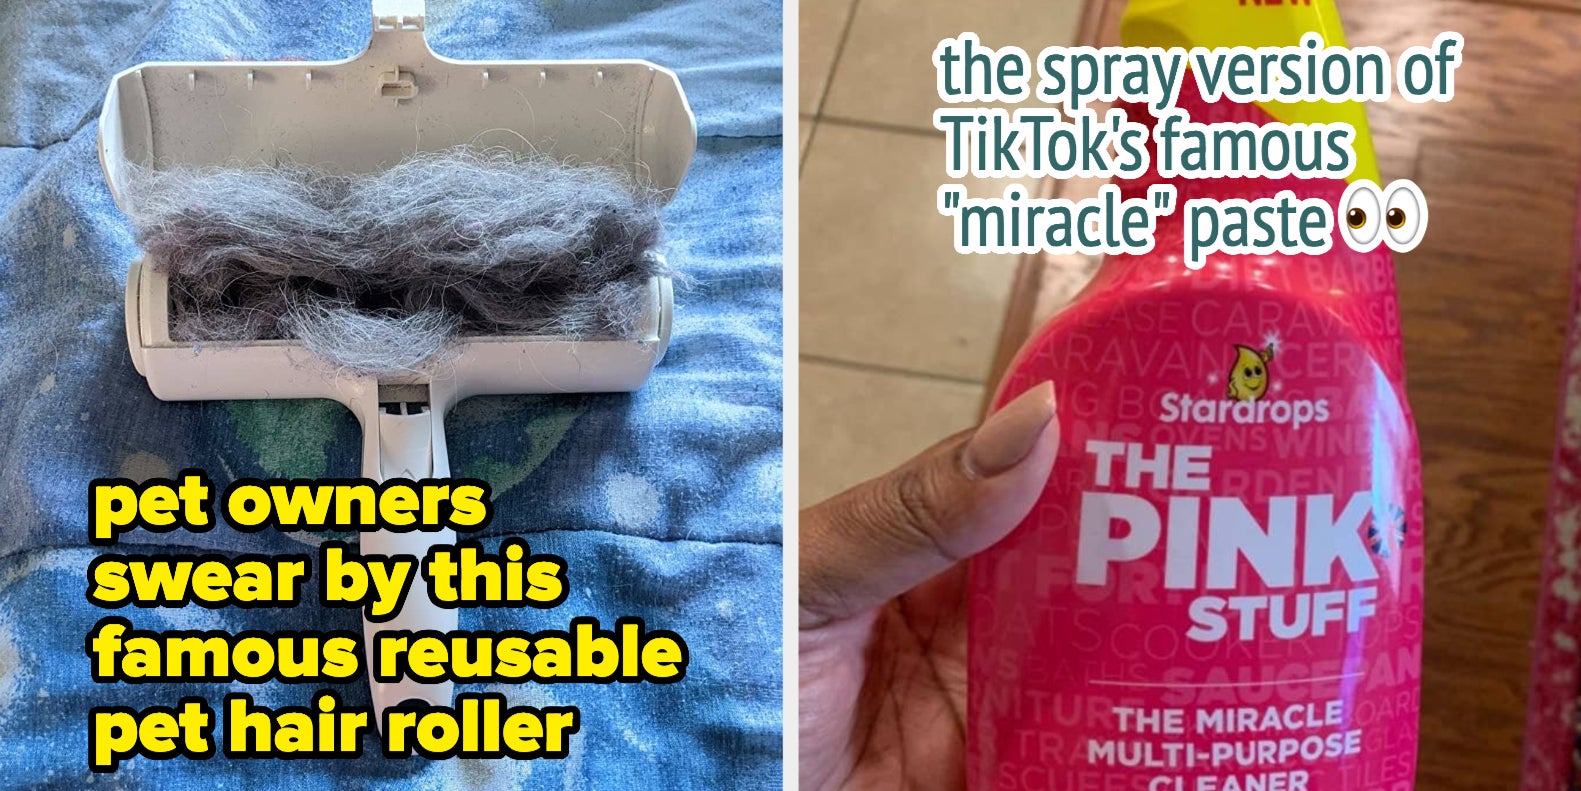 This TikTok cleaning hack actually worked: Rubbermaid Scrubber review